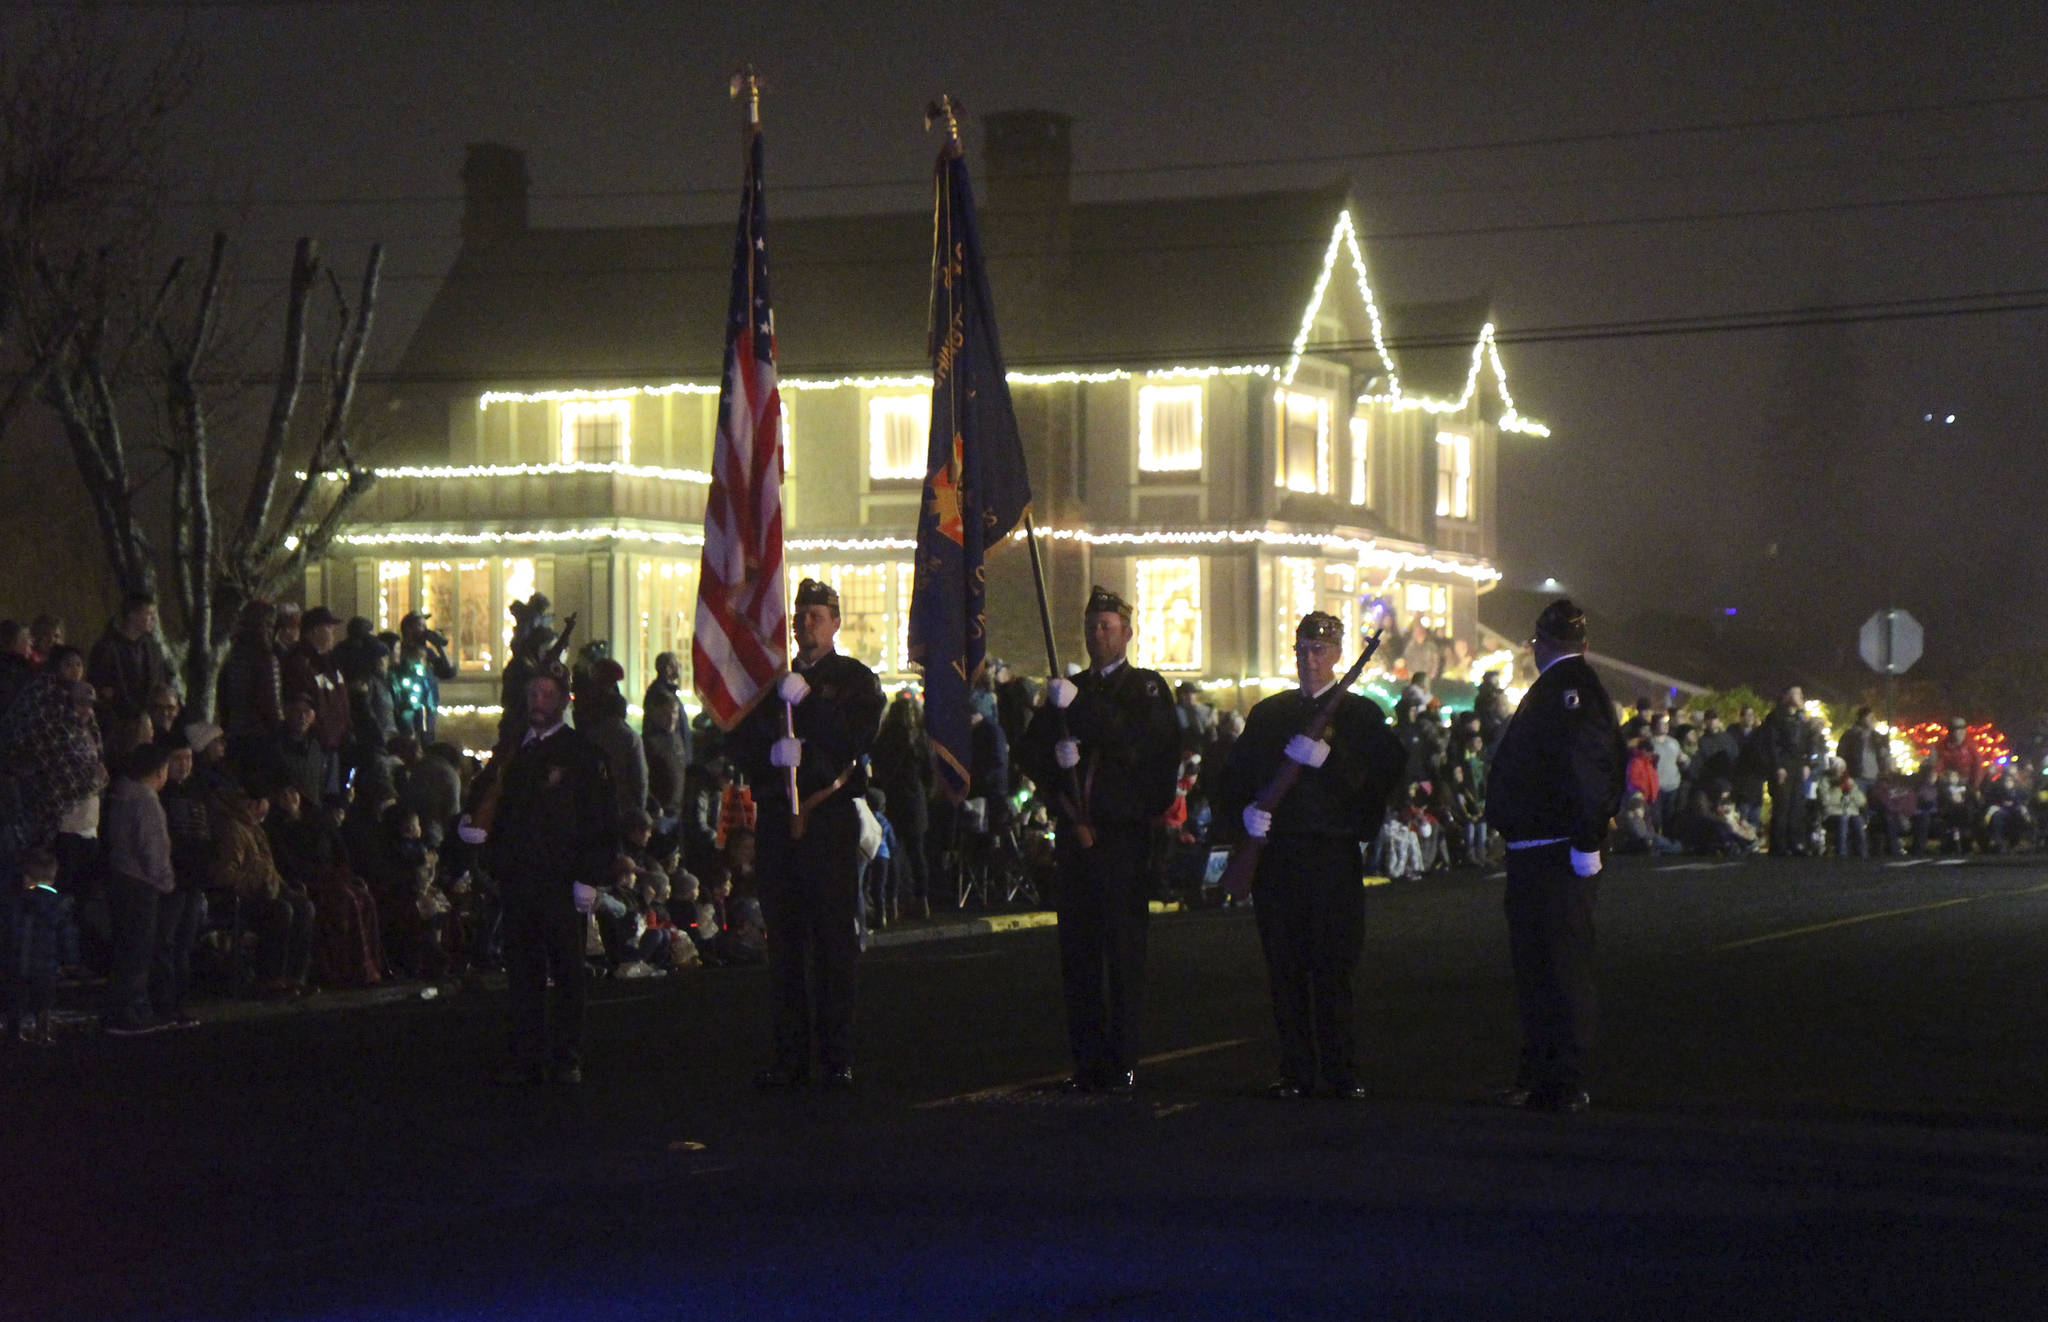 Festival of Lights parade in pictures